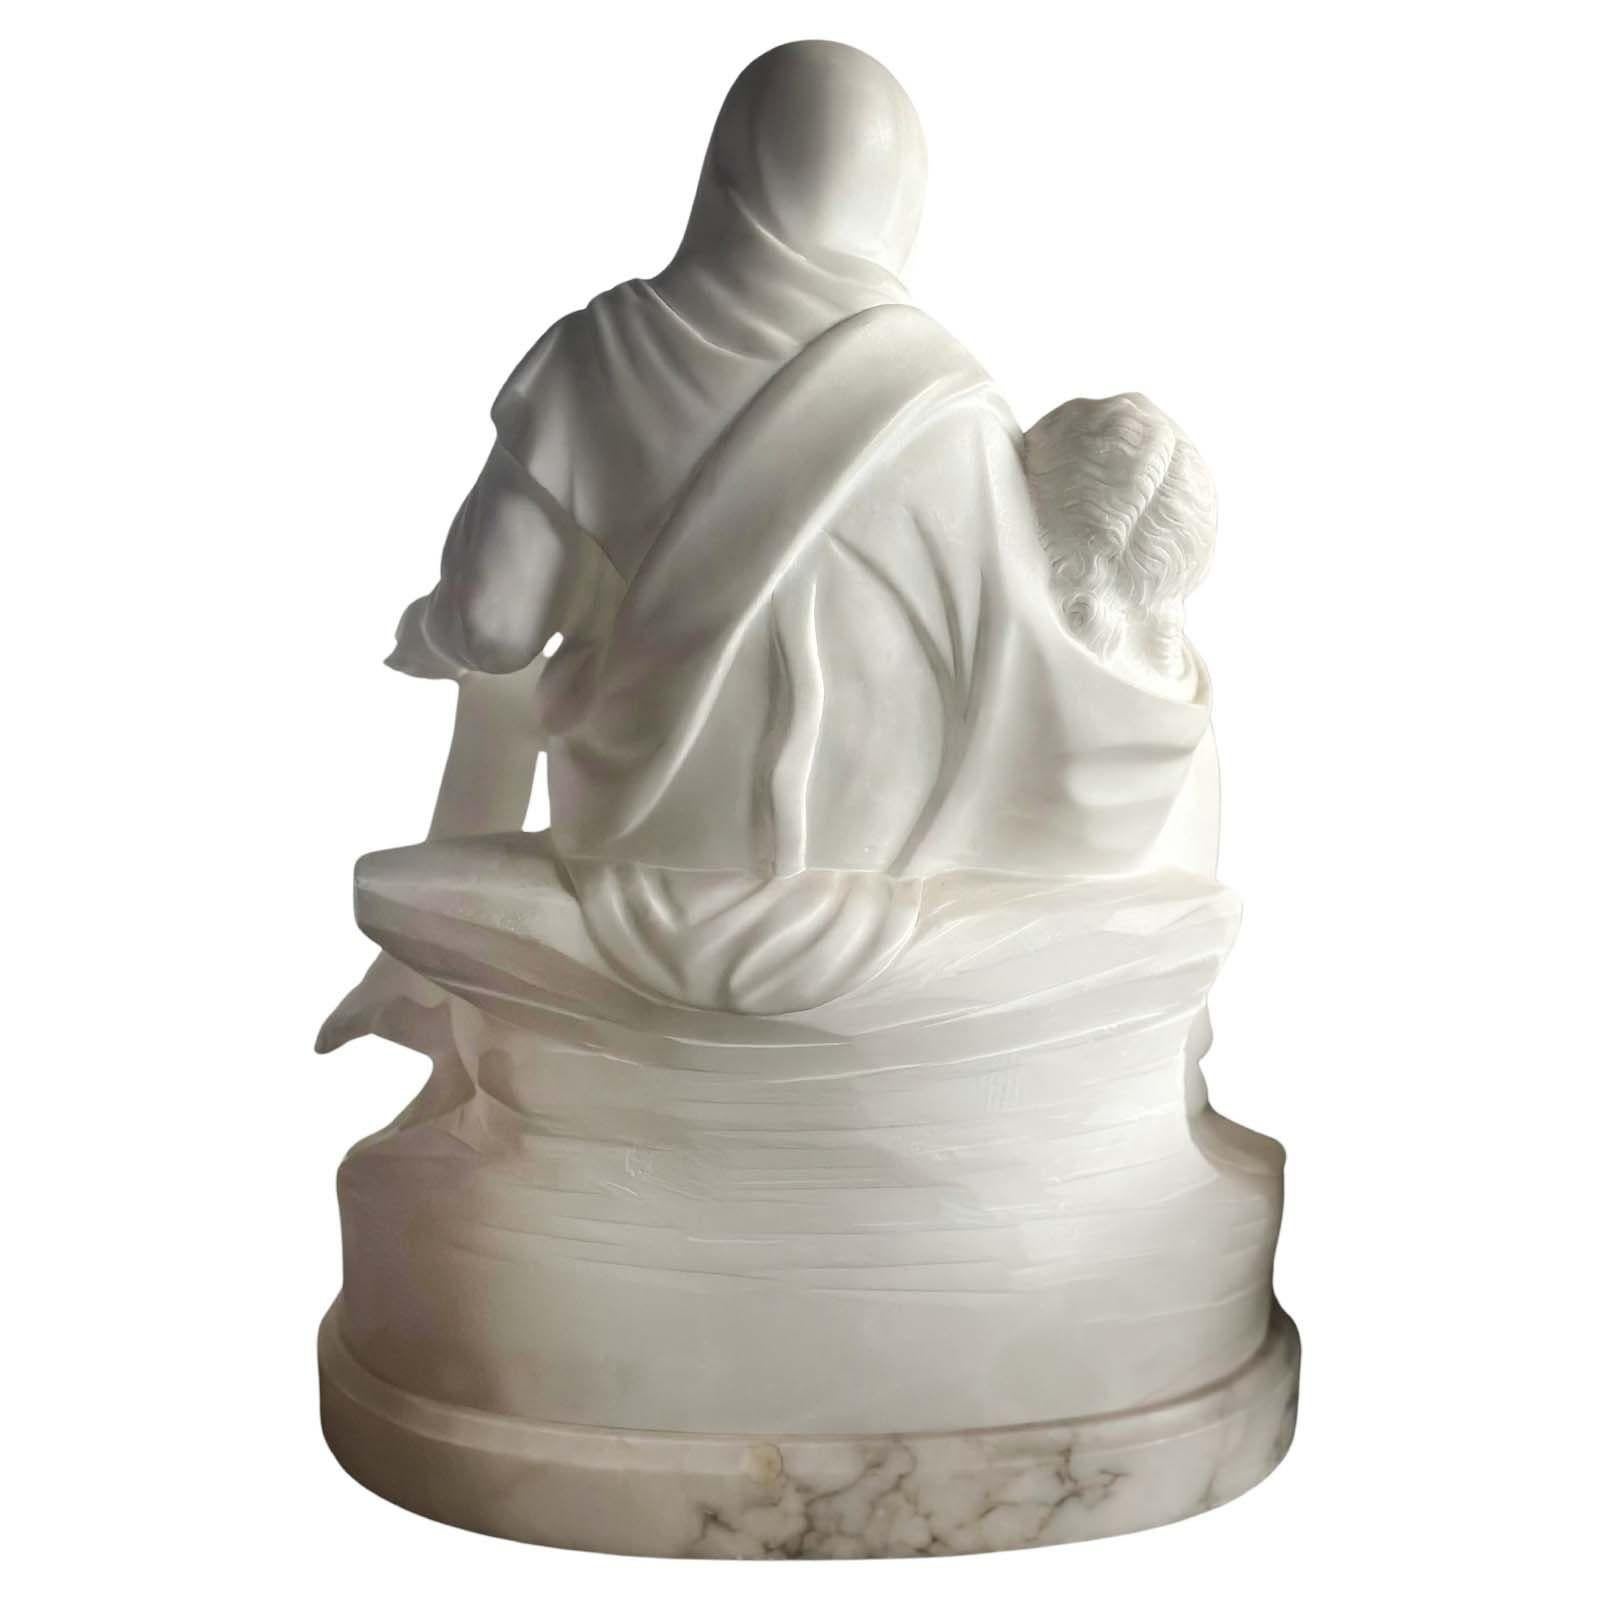 Reverent white marble sculpture after Michelangelo's eminent 'Madonna della Pietà', depicting the Virgin Mary holding the lifeless body of her son, Jesus Christ. It captures the strength of maternal love and the profound sorrow she must have